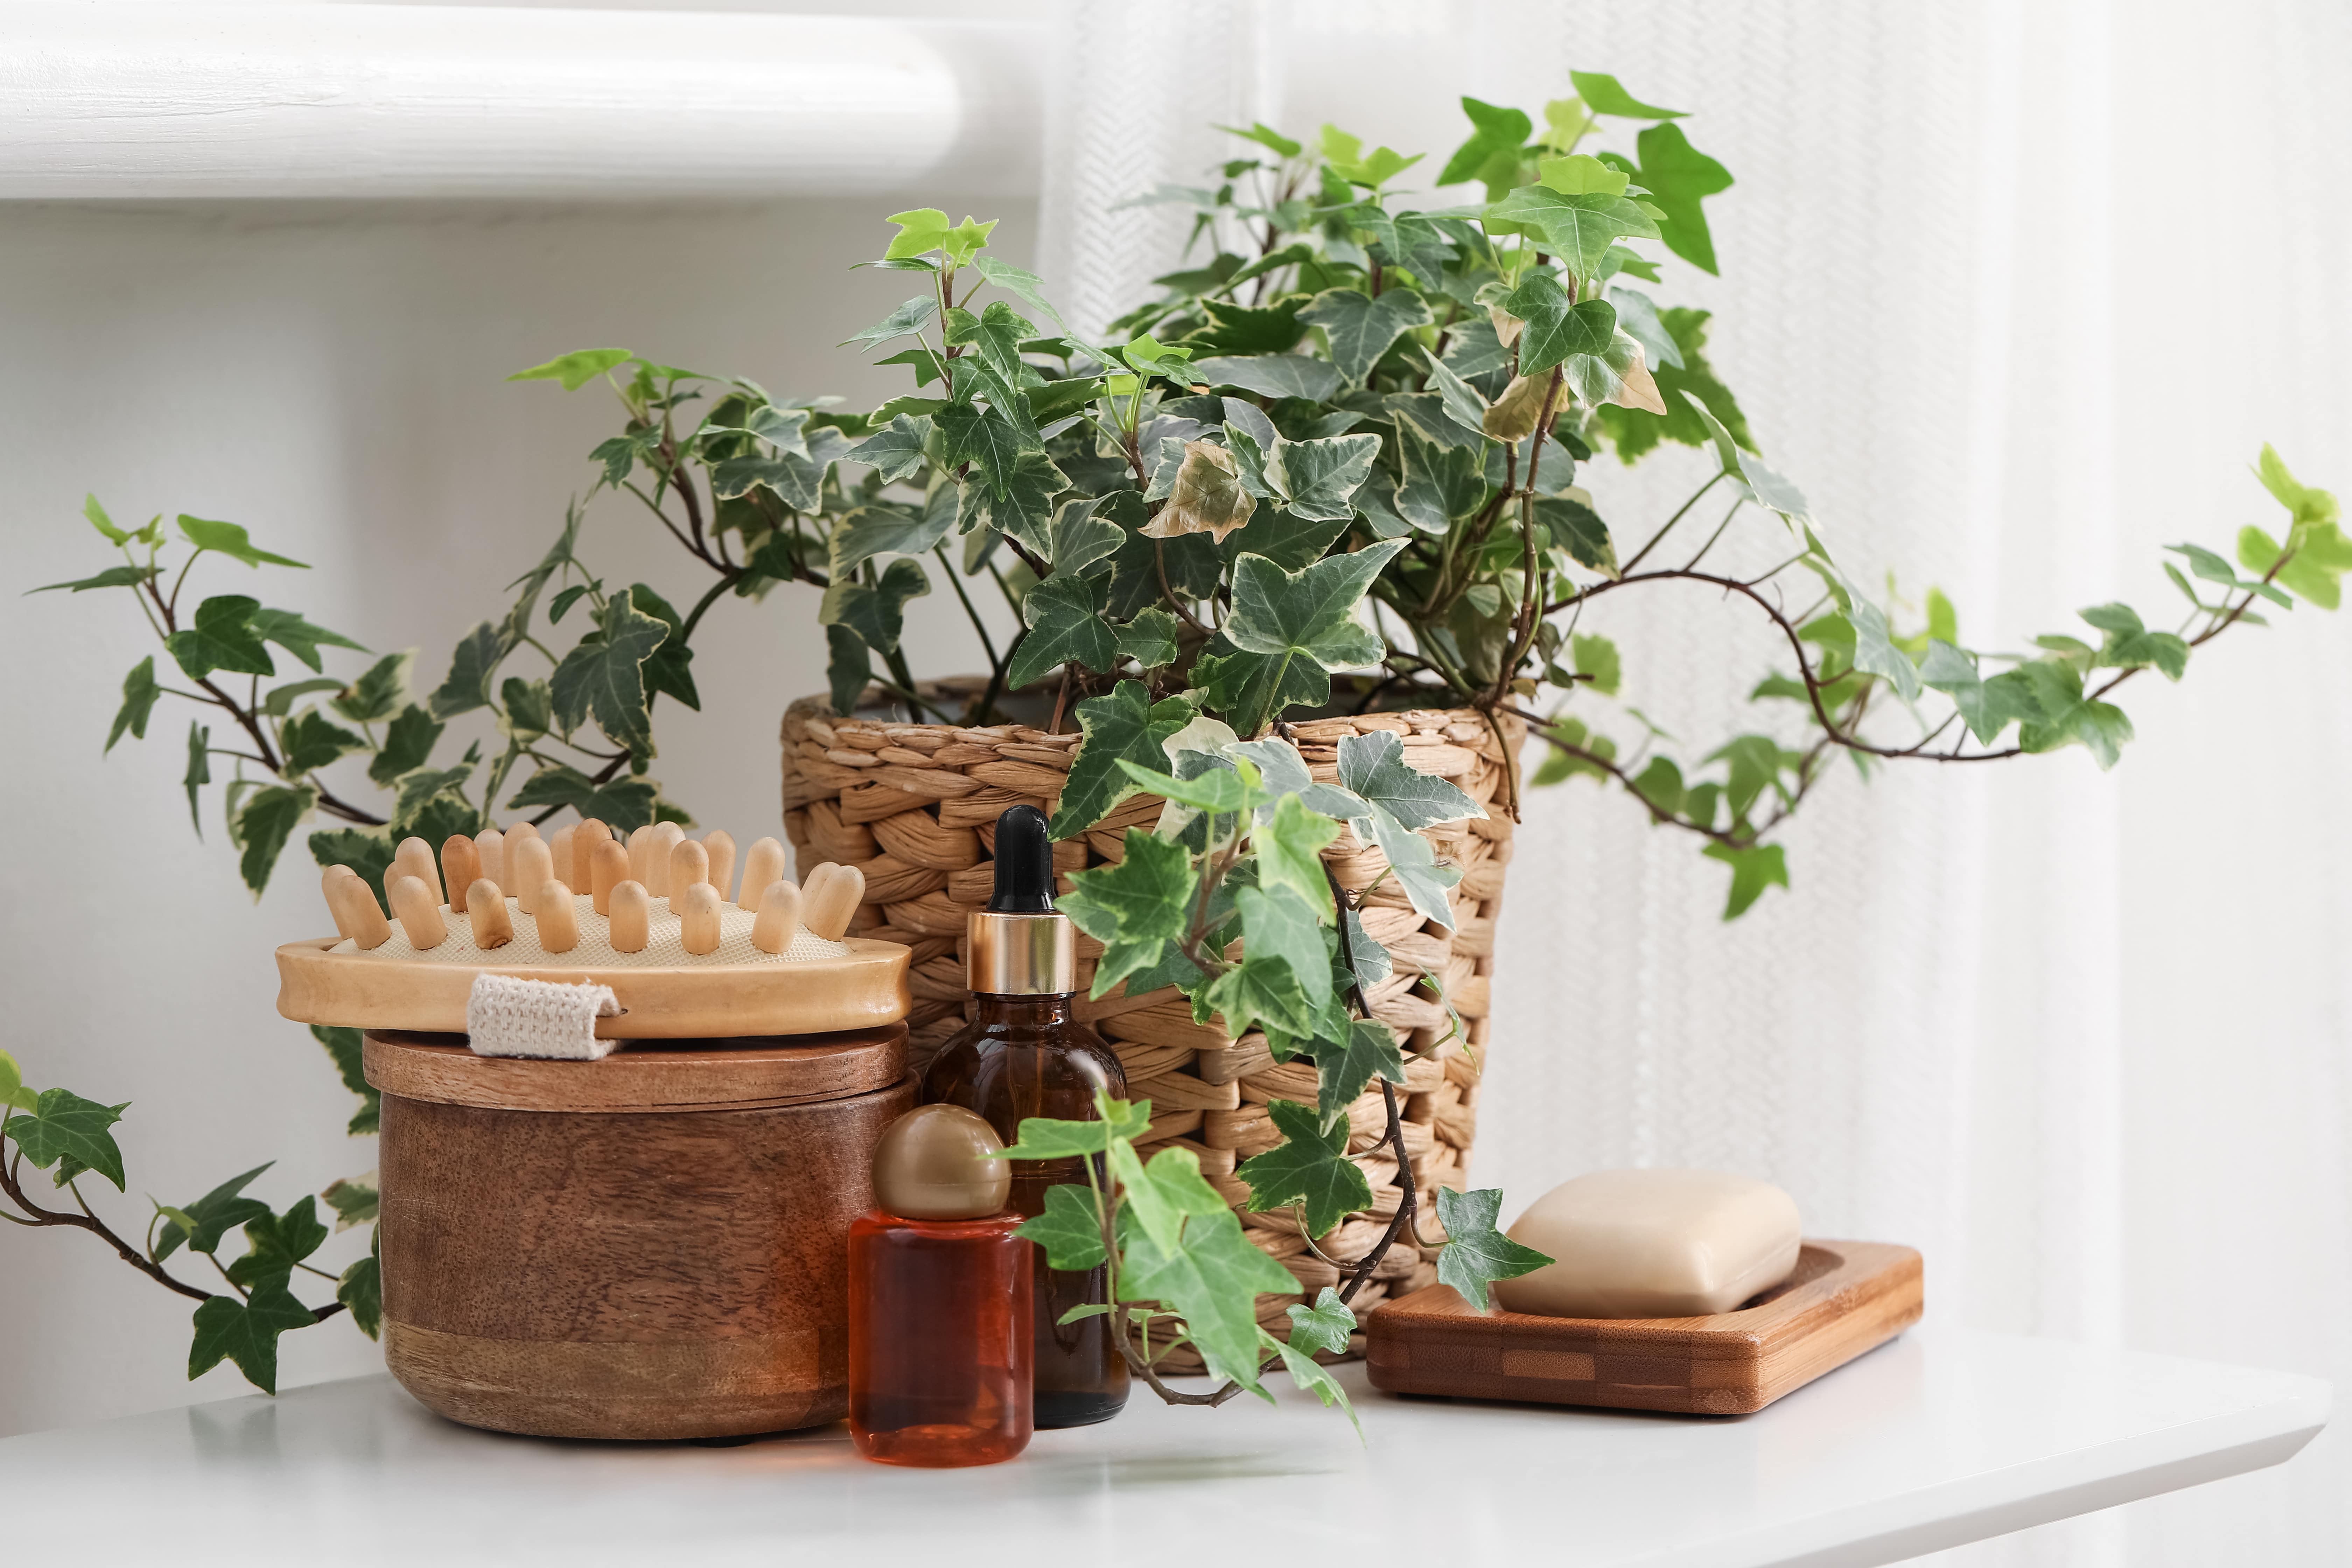 English ivy potted in a wicker basket surrounded by toiletries 